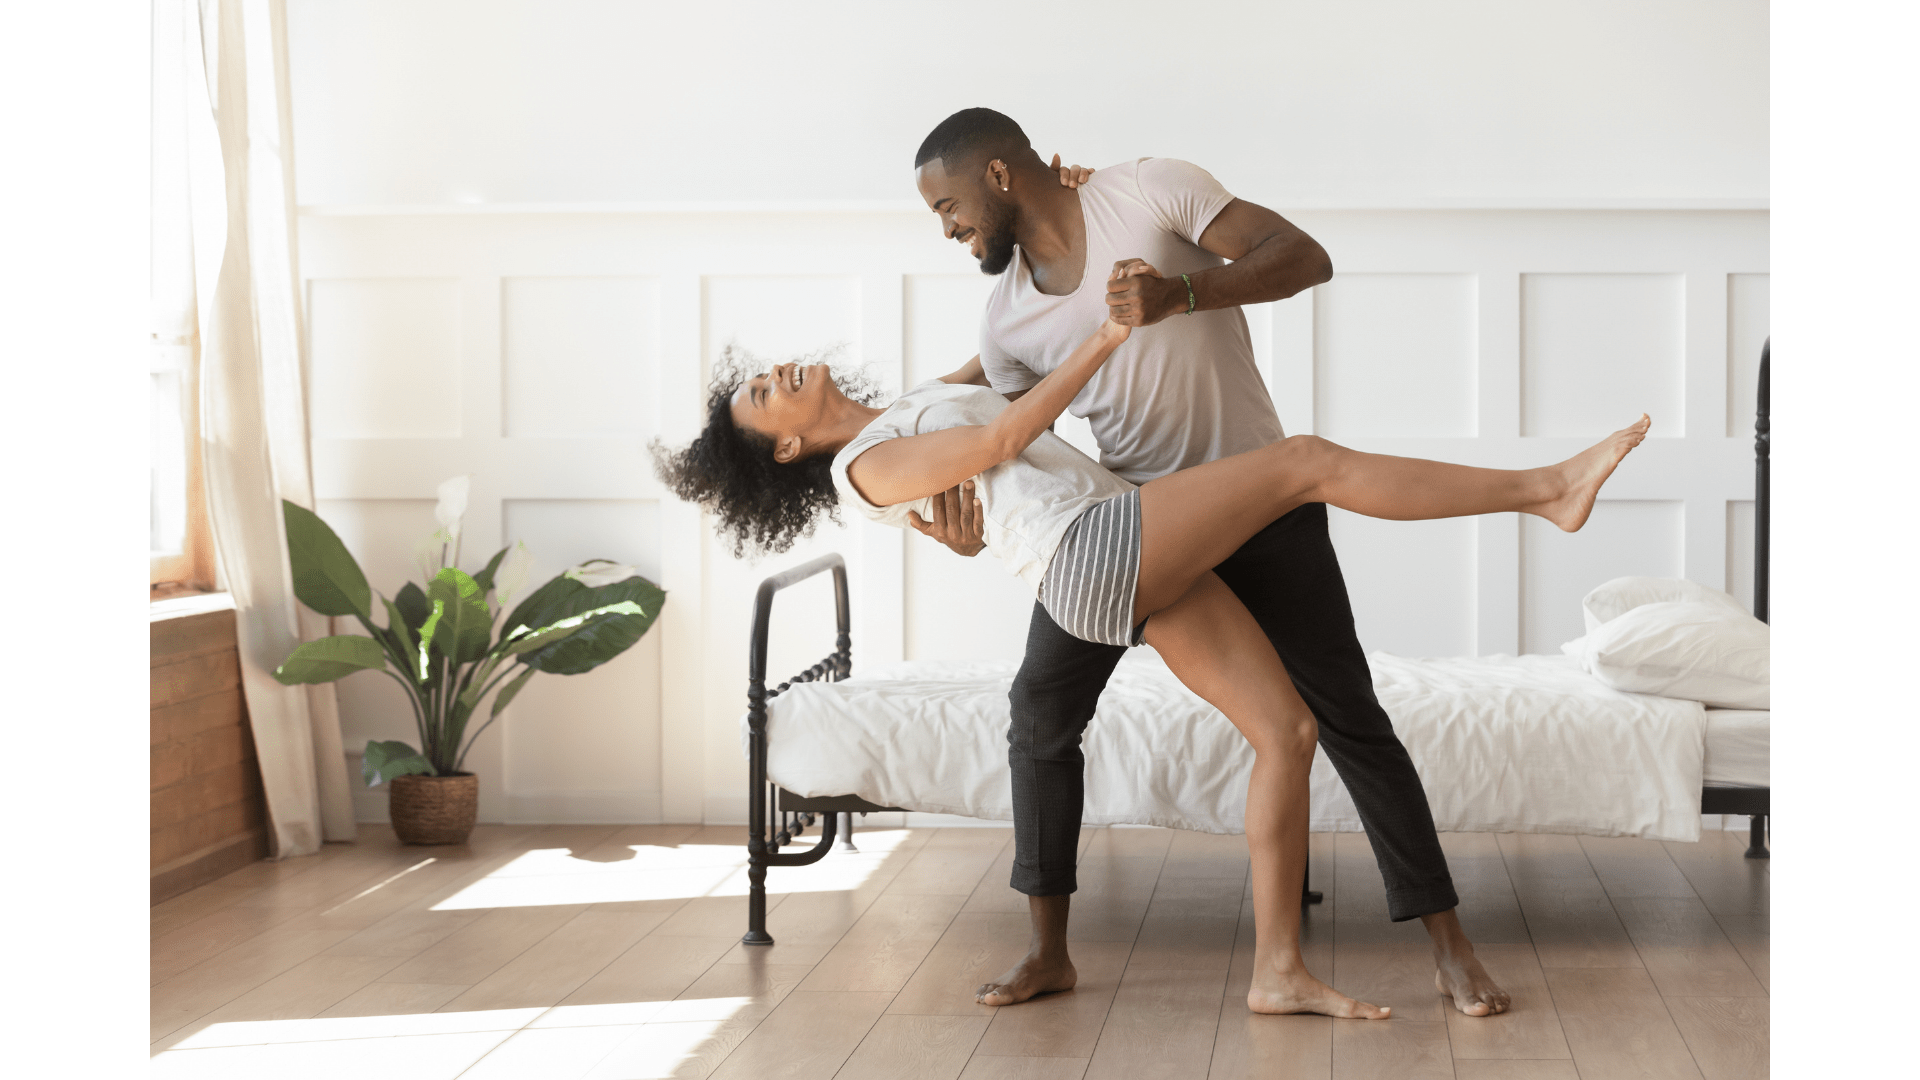 A couple dancing together in their bedroom next to the bed